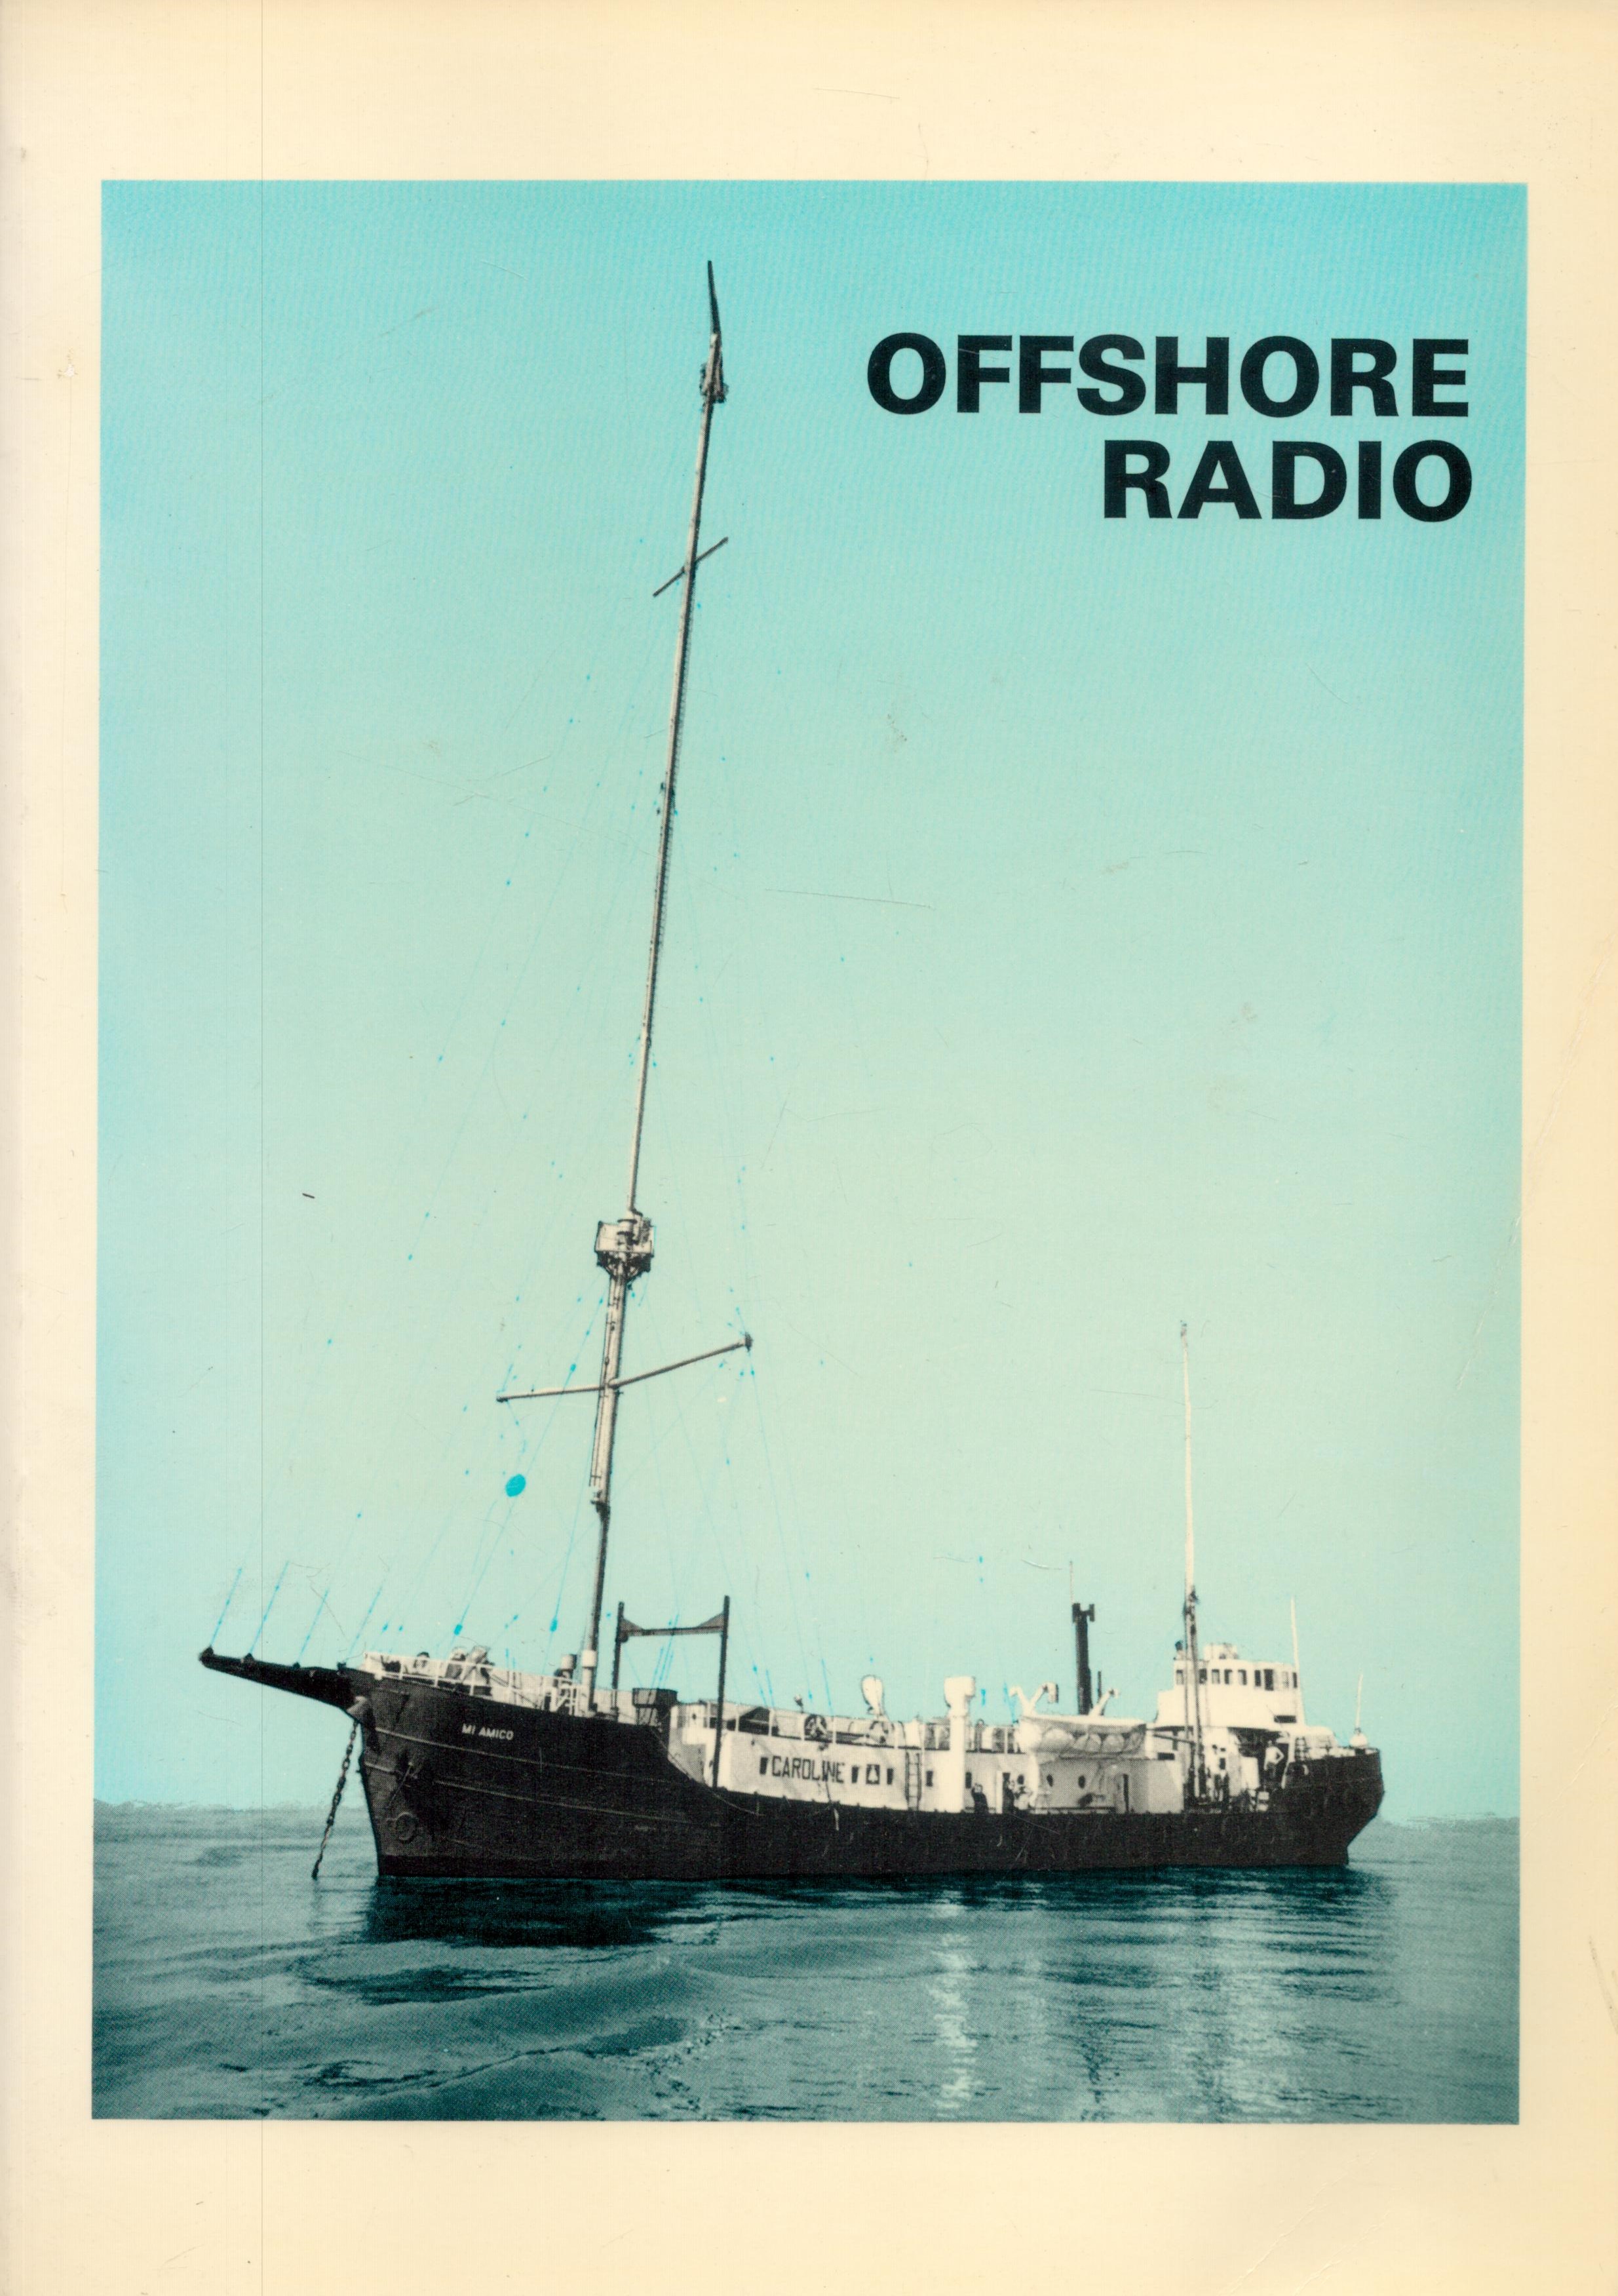 Offshore Radio by Gerry Bishop 1975 First Edition Softback Book with 125 pages published by Iceni